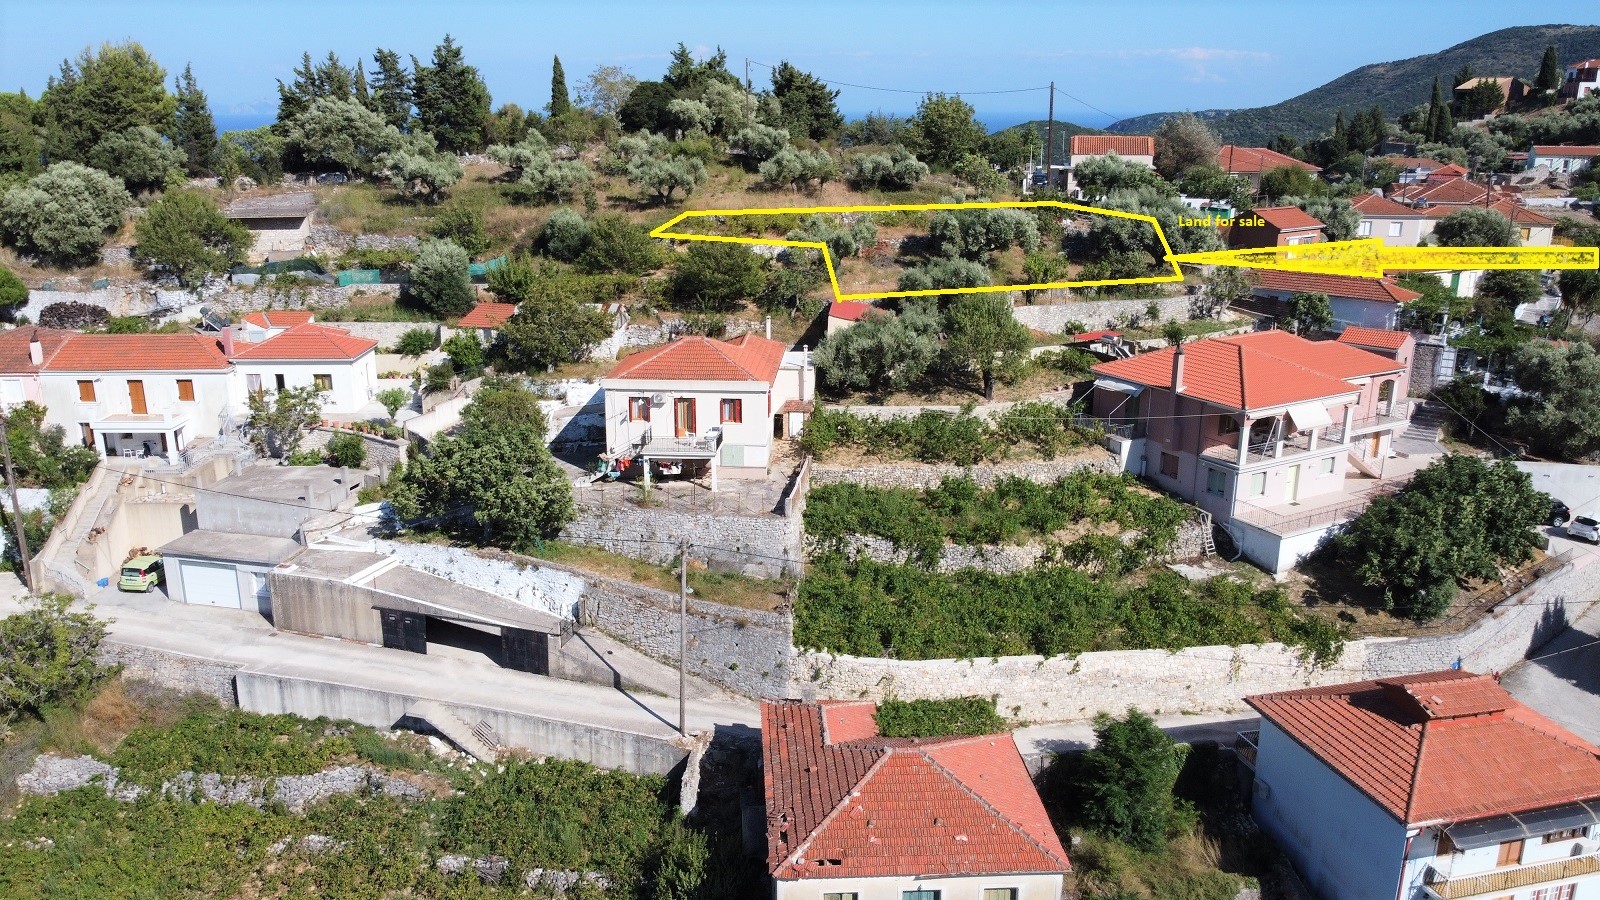 Aerial view of land for sale on Ithaca, Greece, Perachori